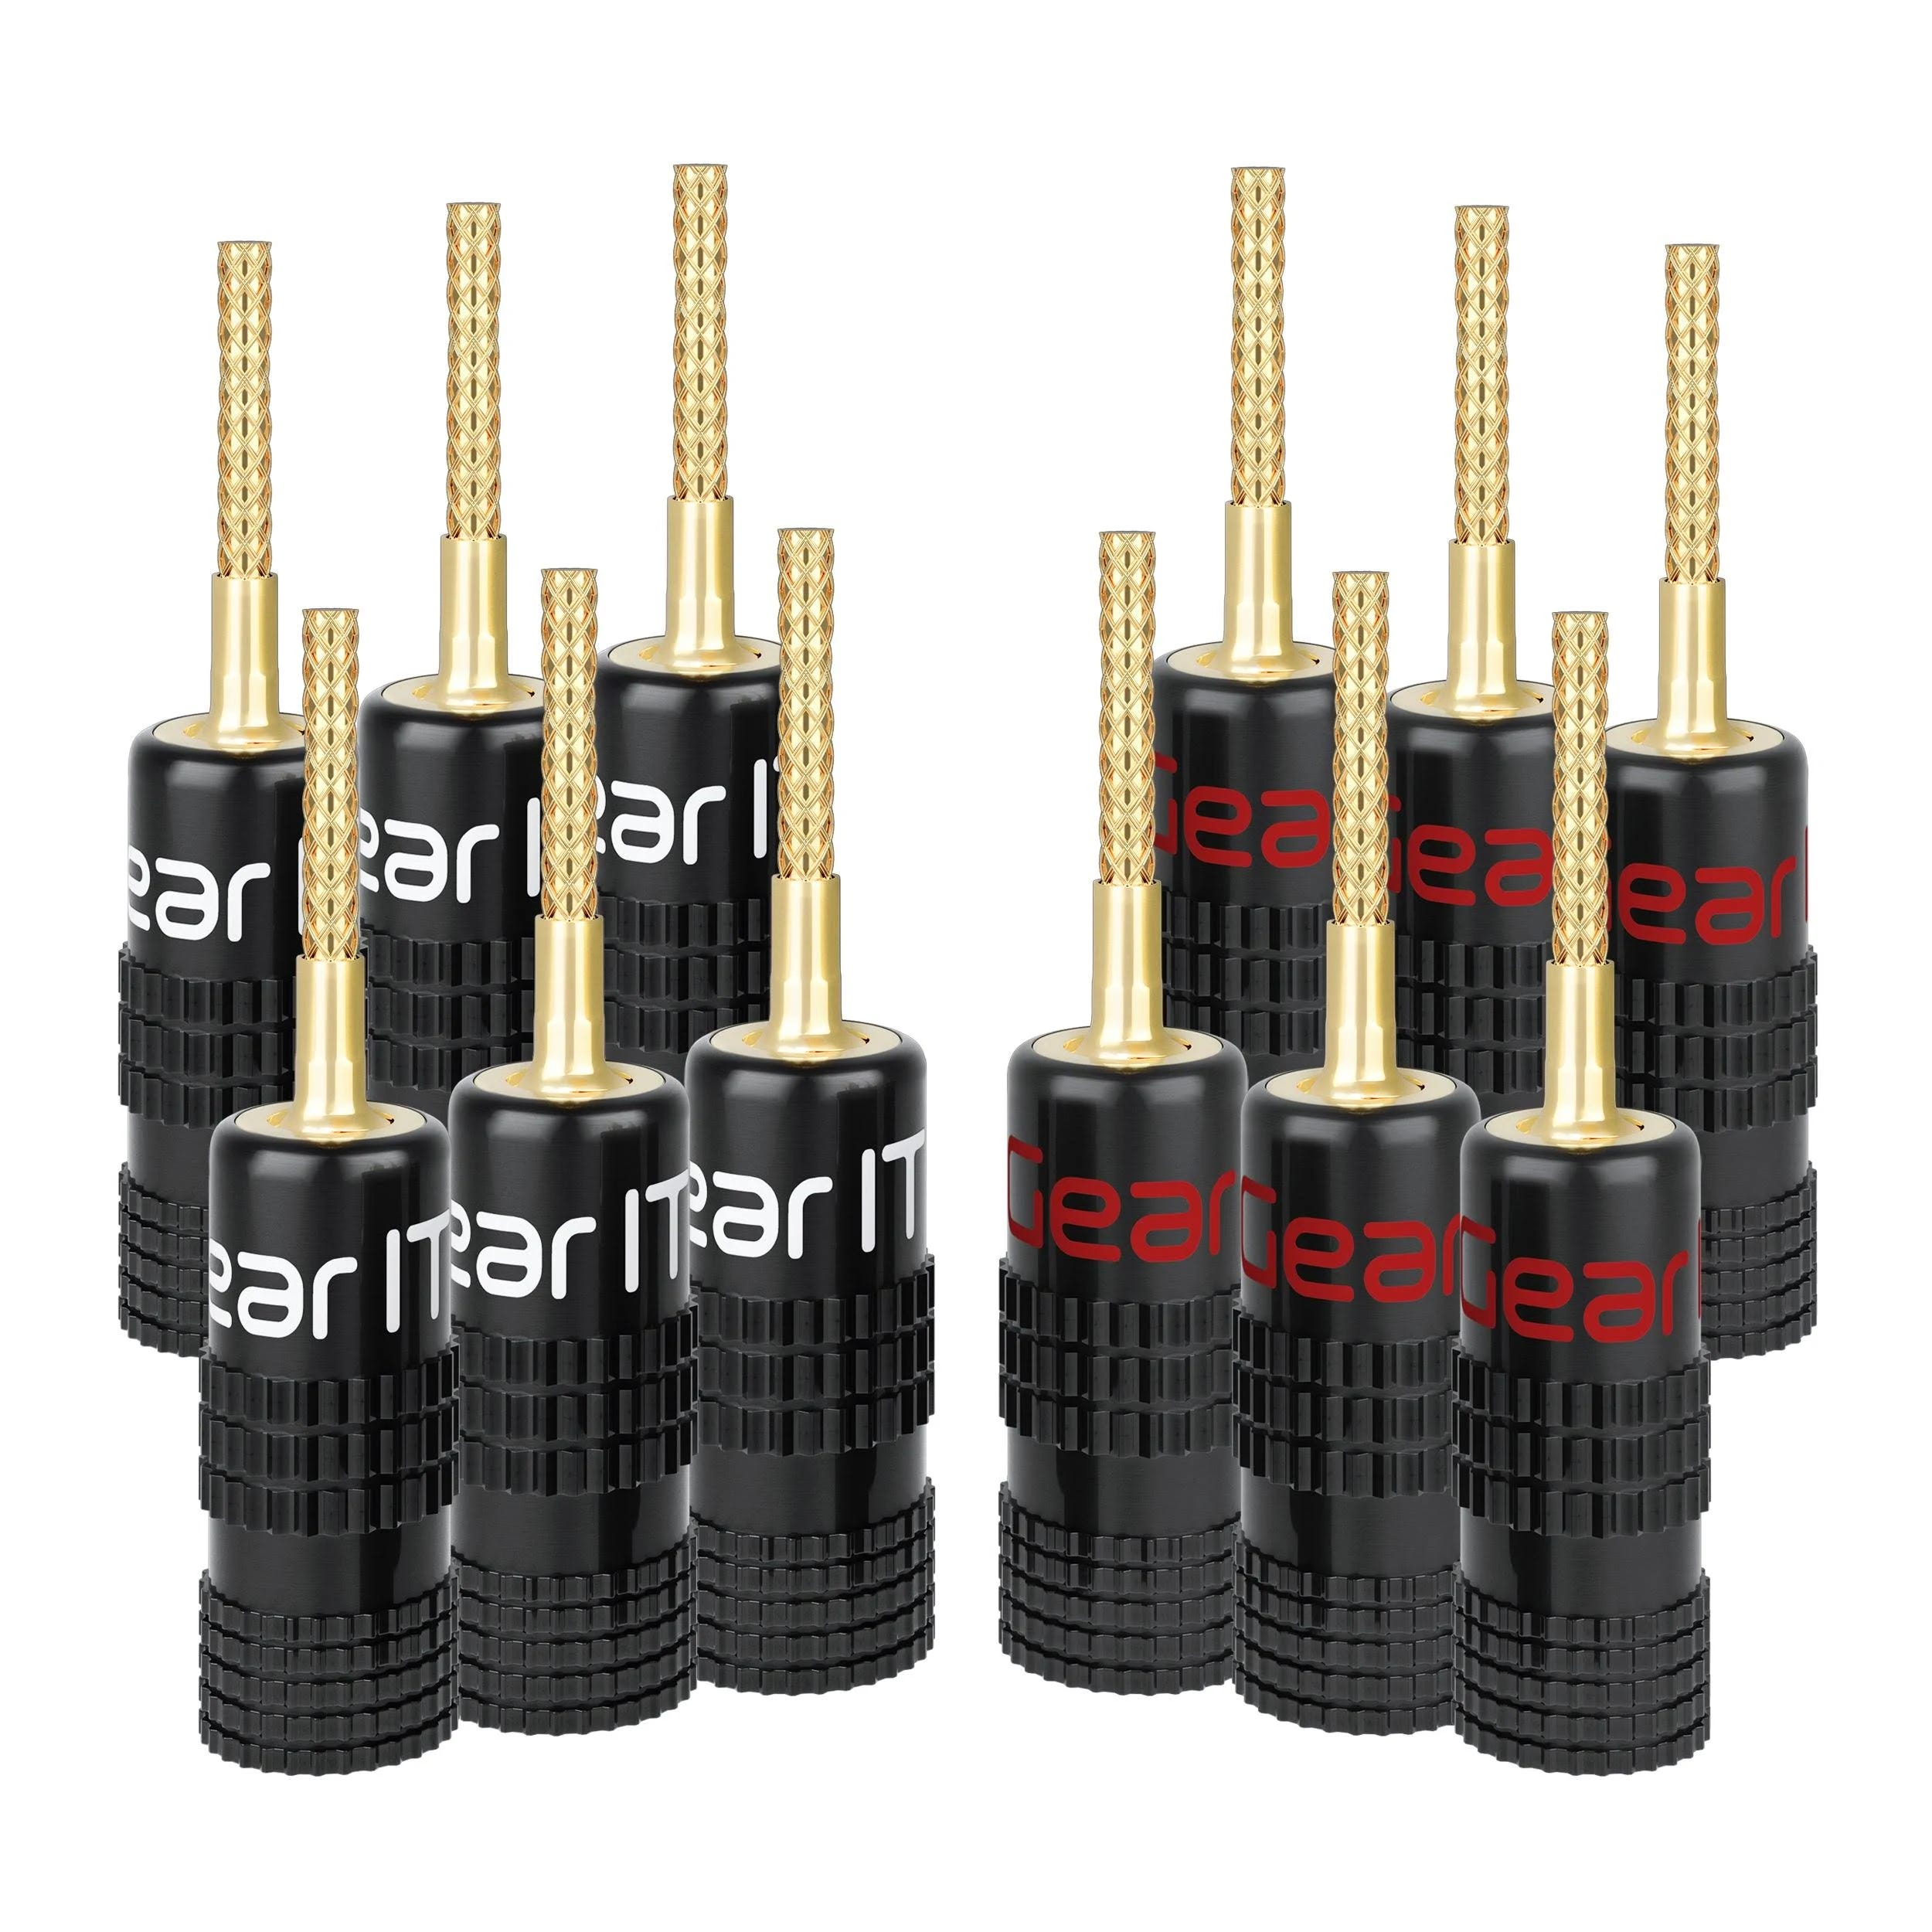 GearIT Flex Pin Gold-Plated Speaker Wire Connectors | Image